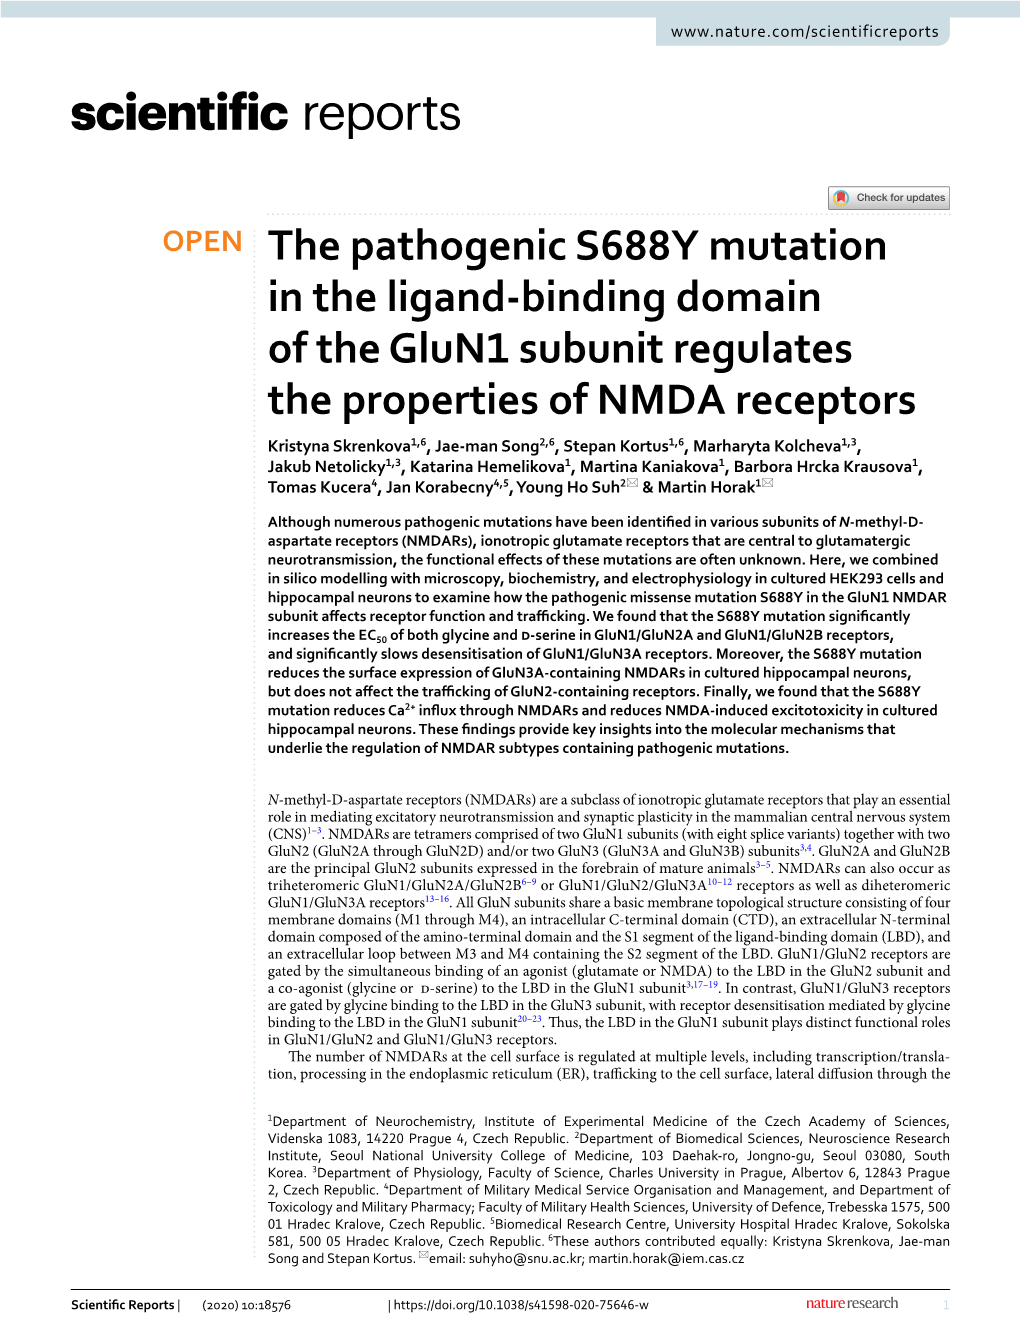 The Pathogenic S688Y Mutation in the Ligand-Binding Domain Of